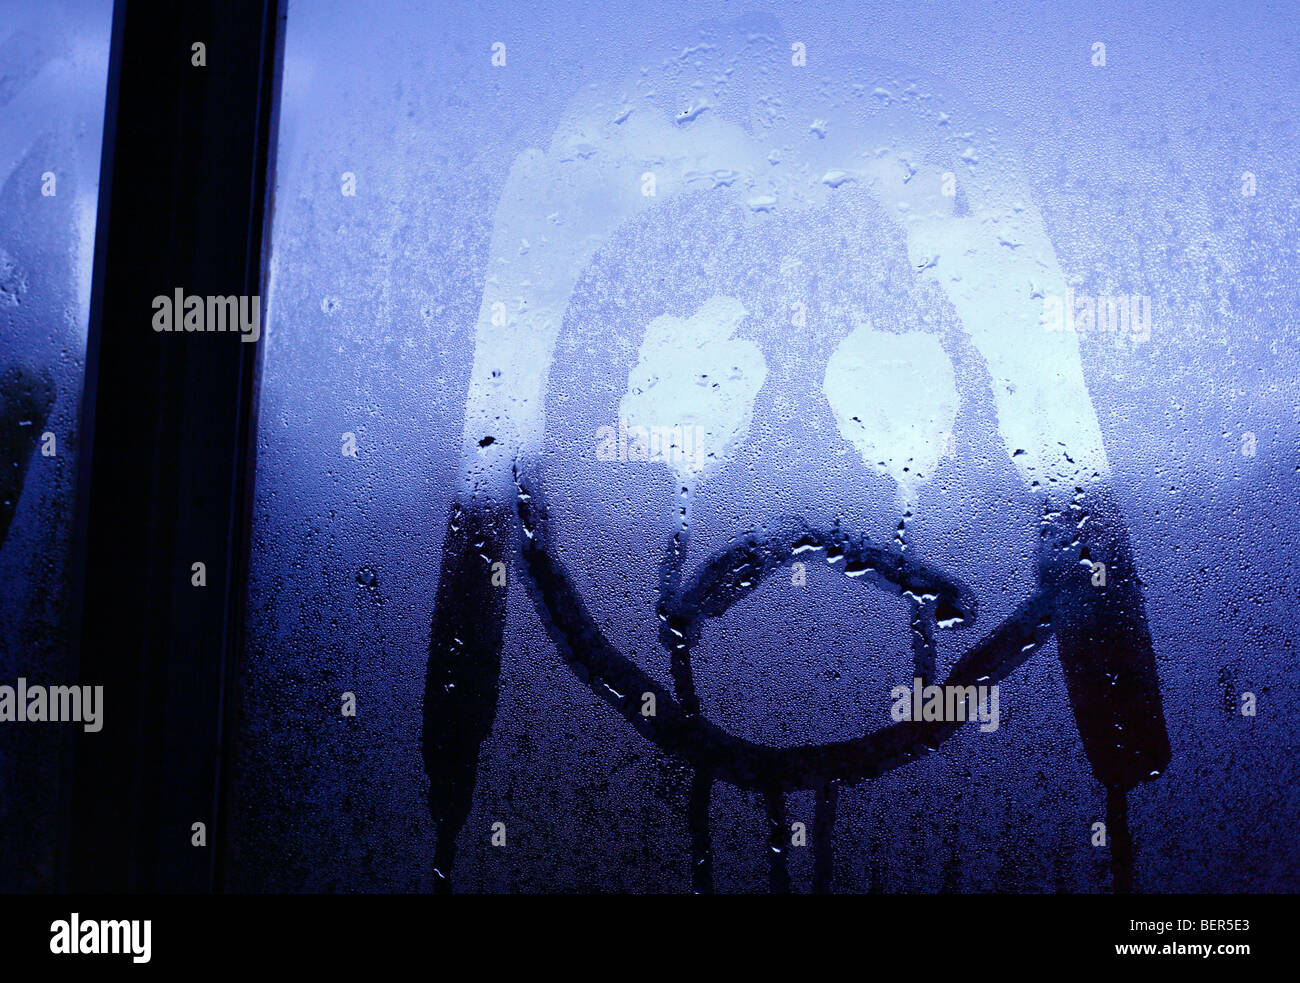 An unhappy childlike face drawn onto window condensation. Stock Photo